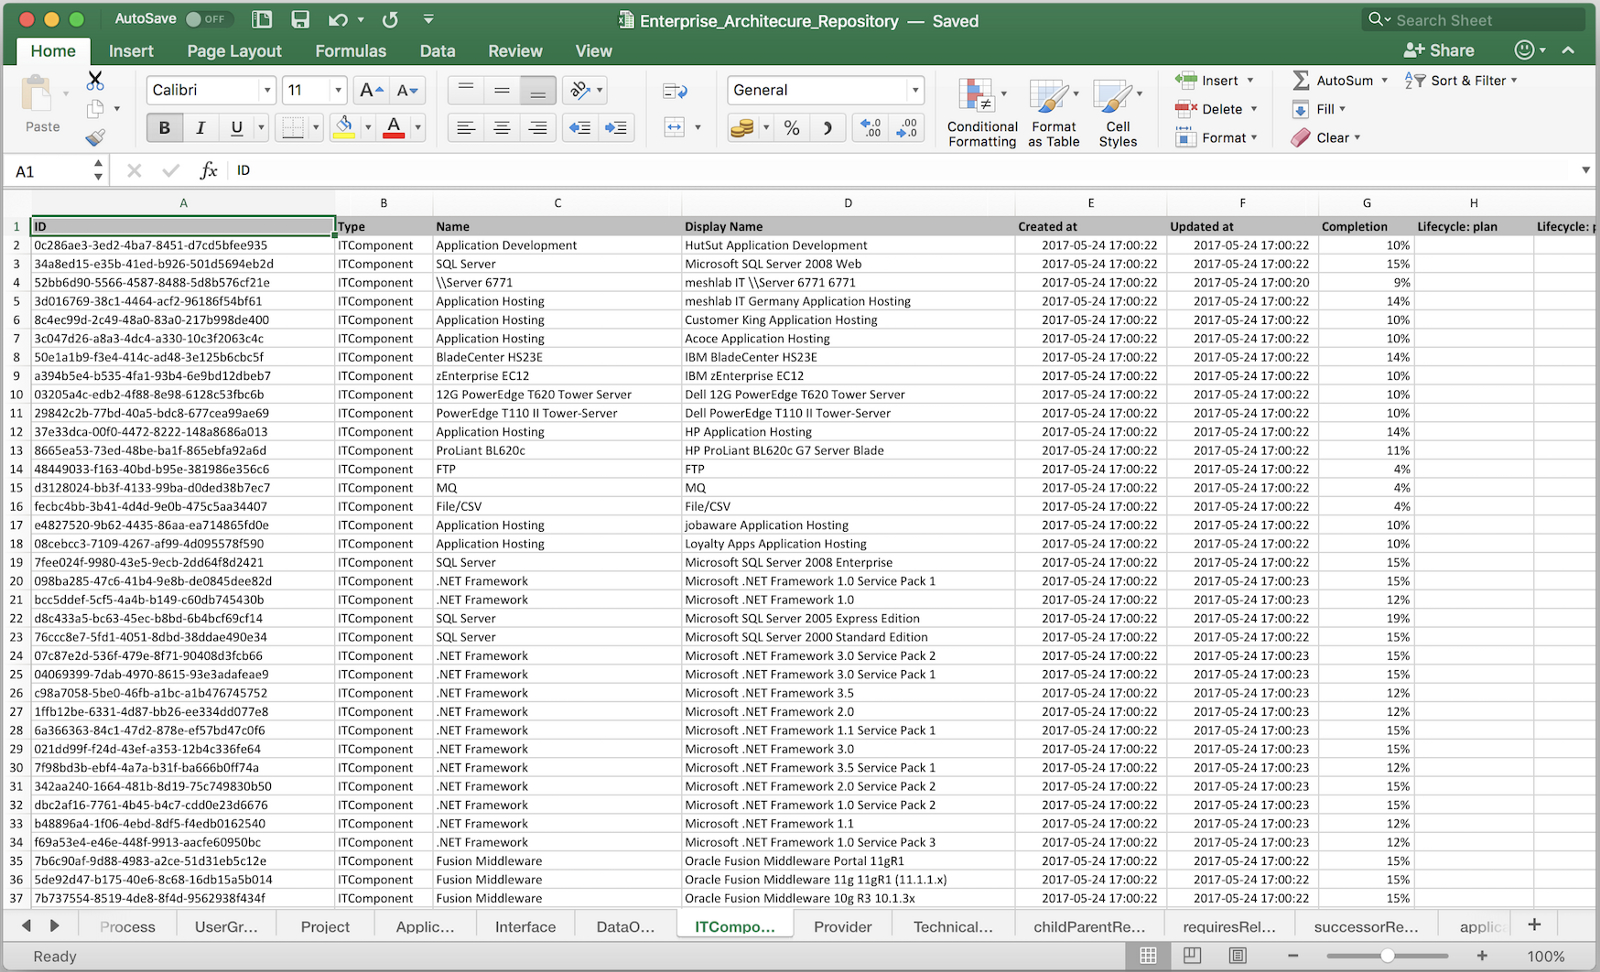 Spreadsheets For Architects For Quick Way To Fail? Enterprise Architecture On Excel.